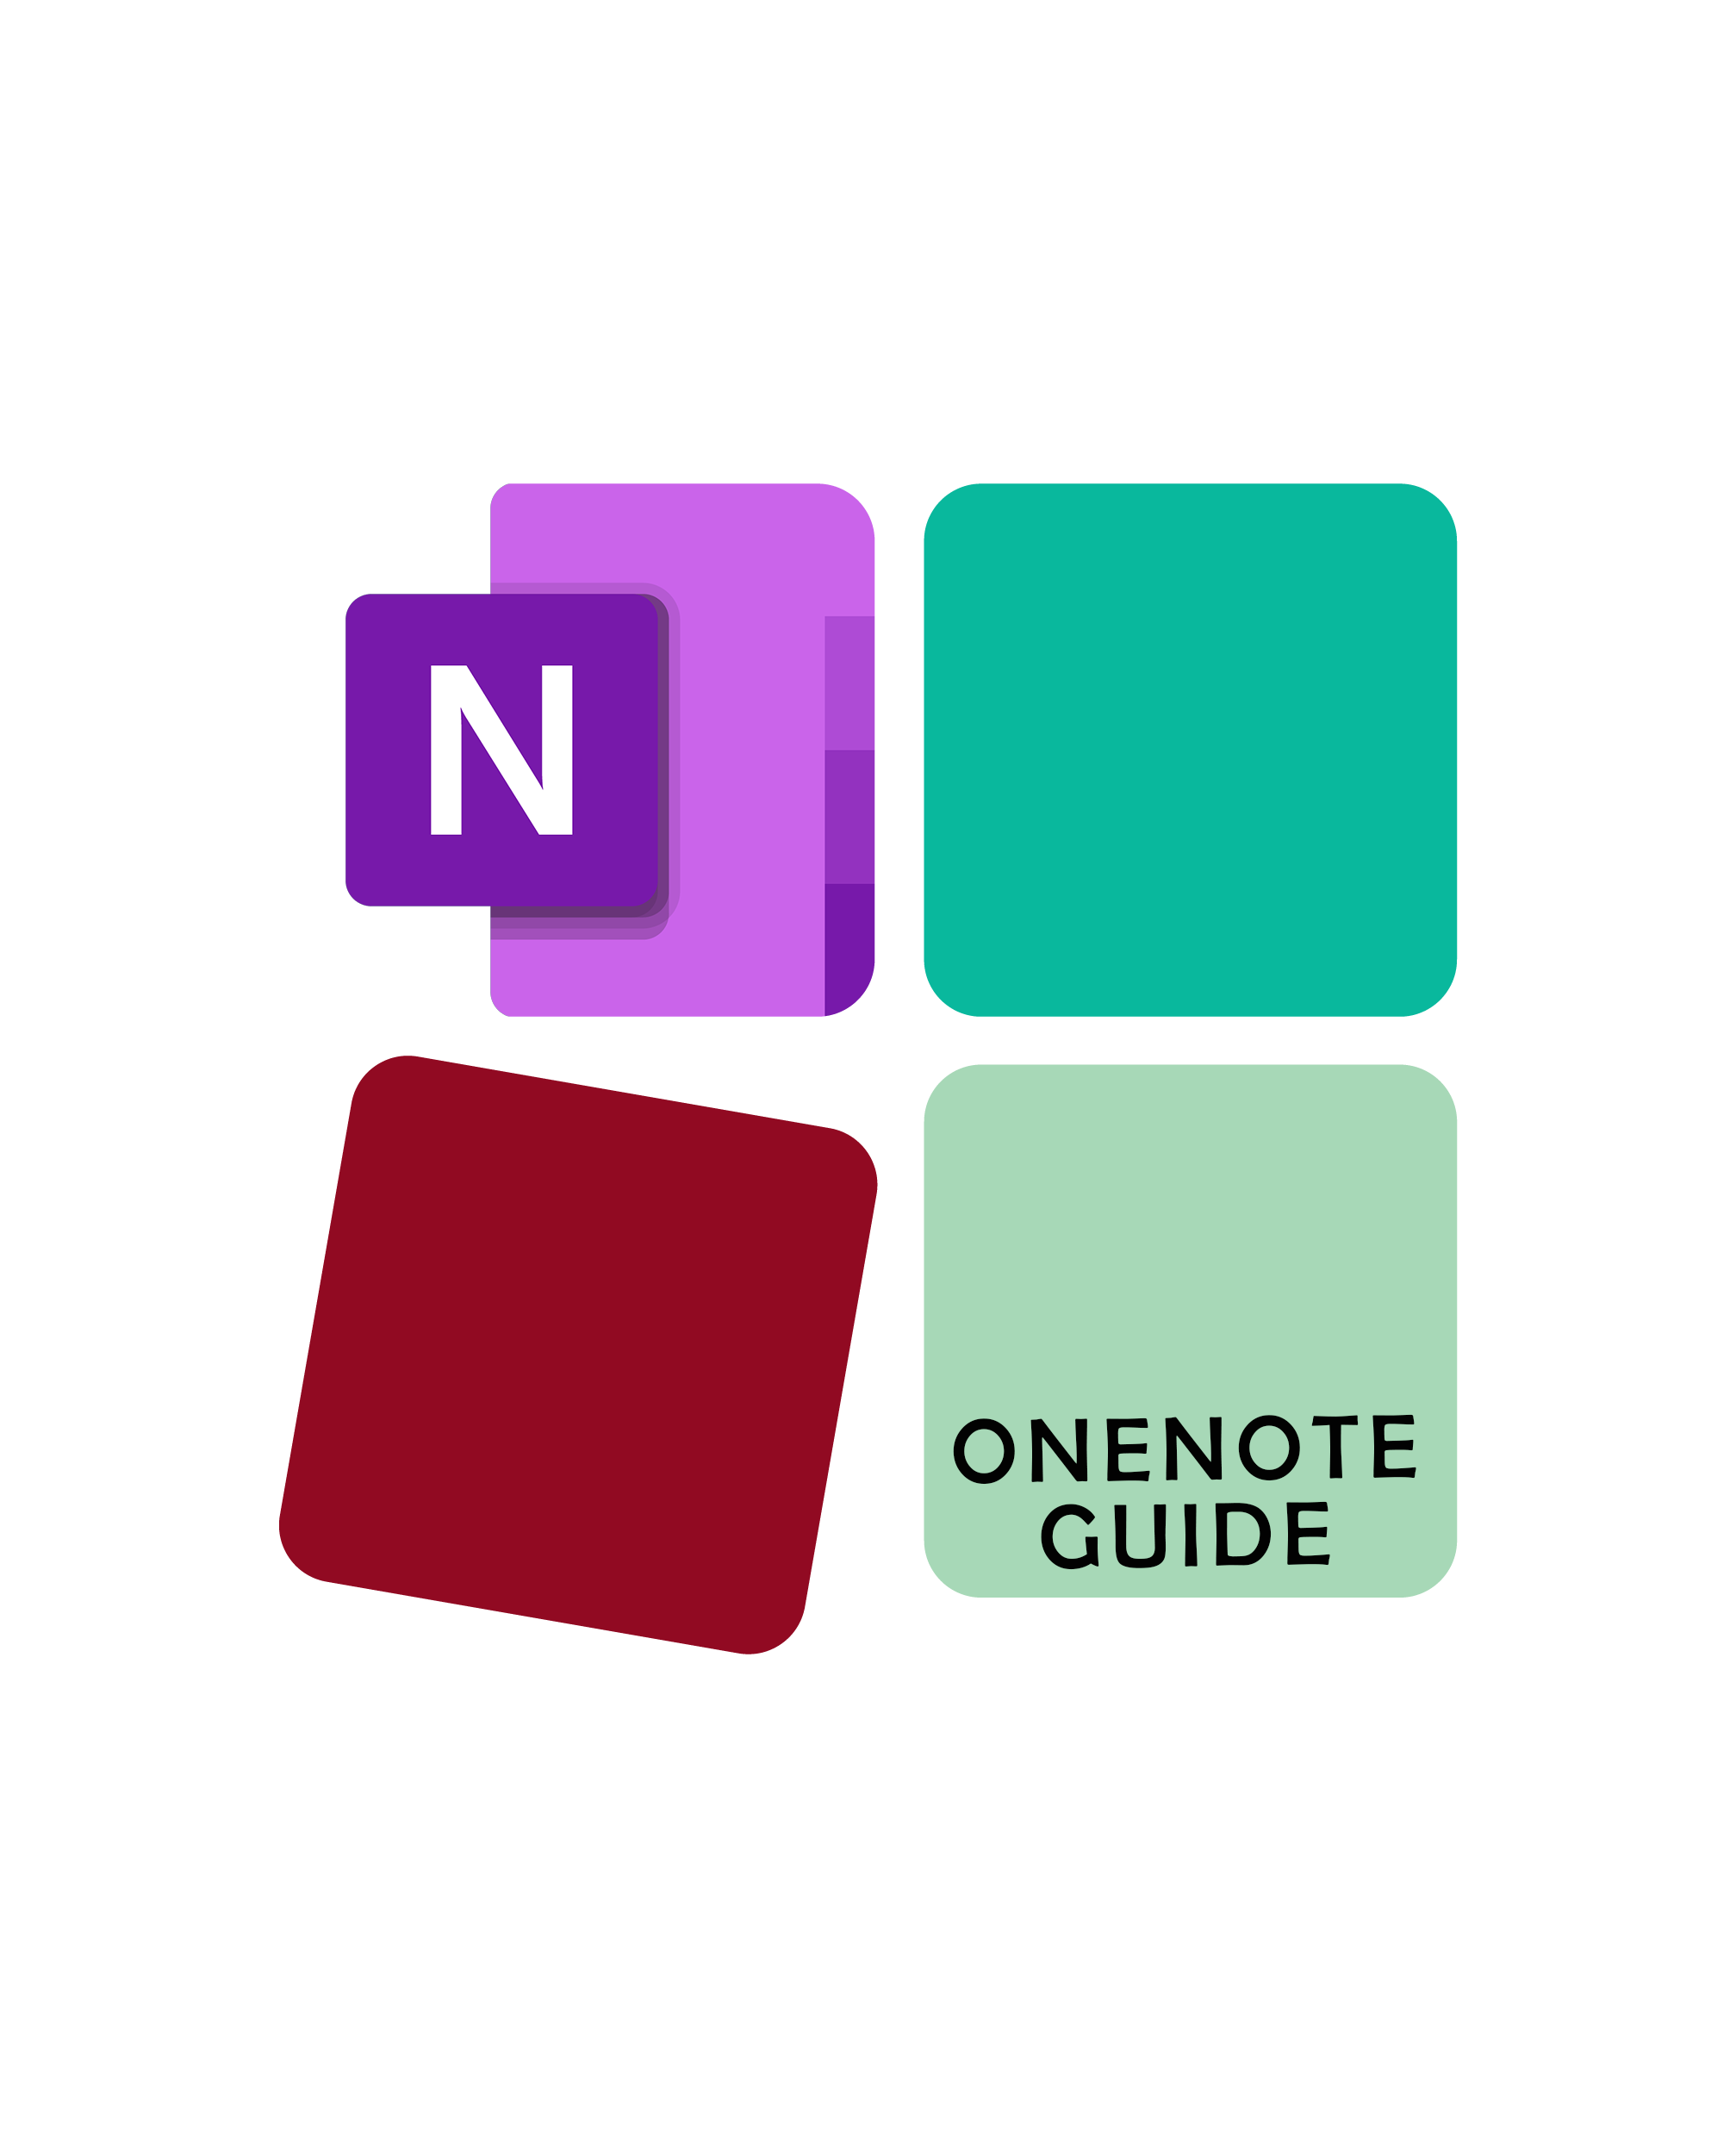 One_Note_Quide_logo.png